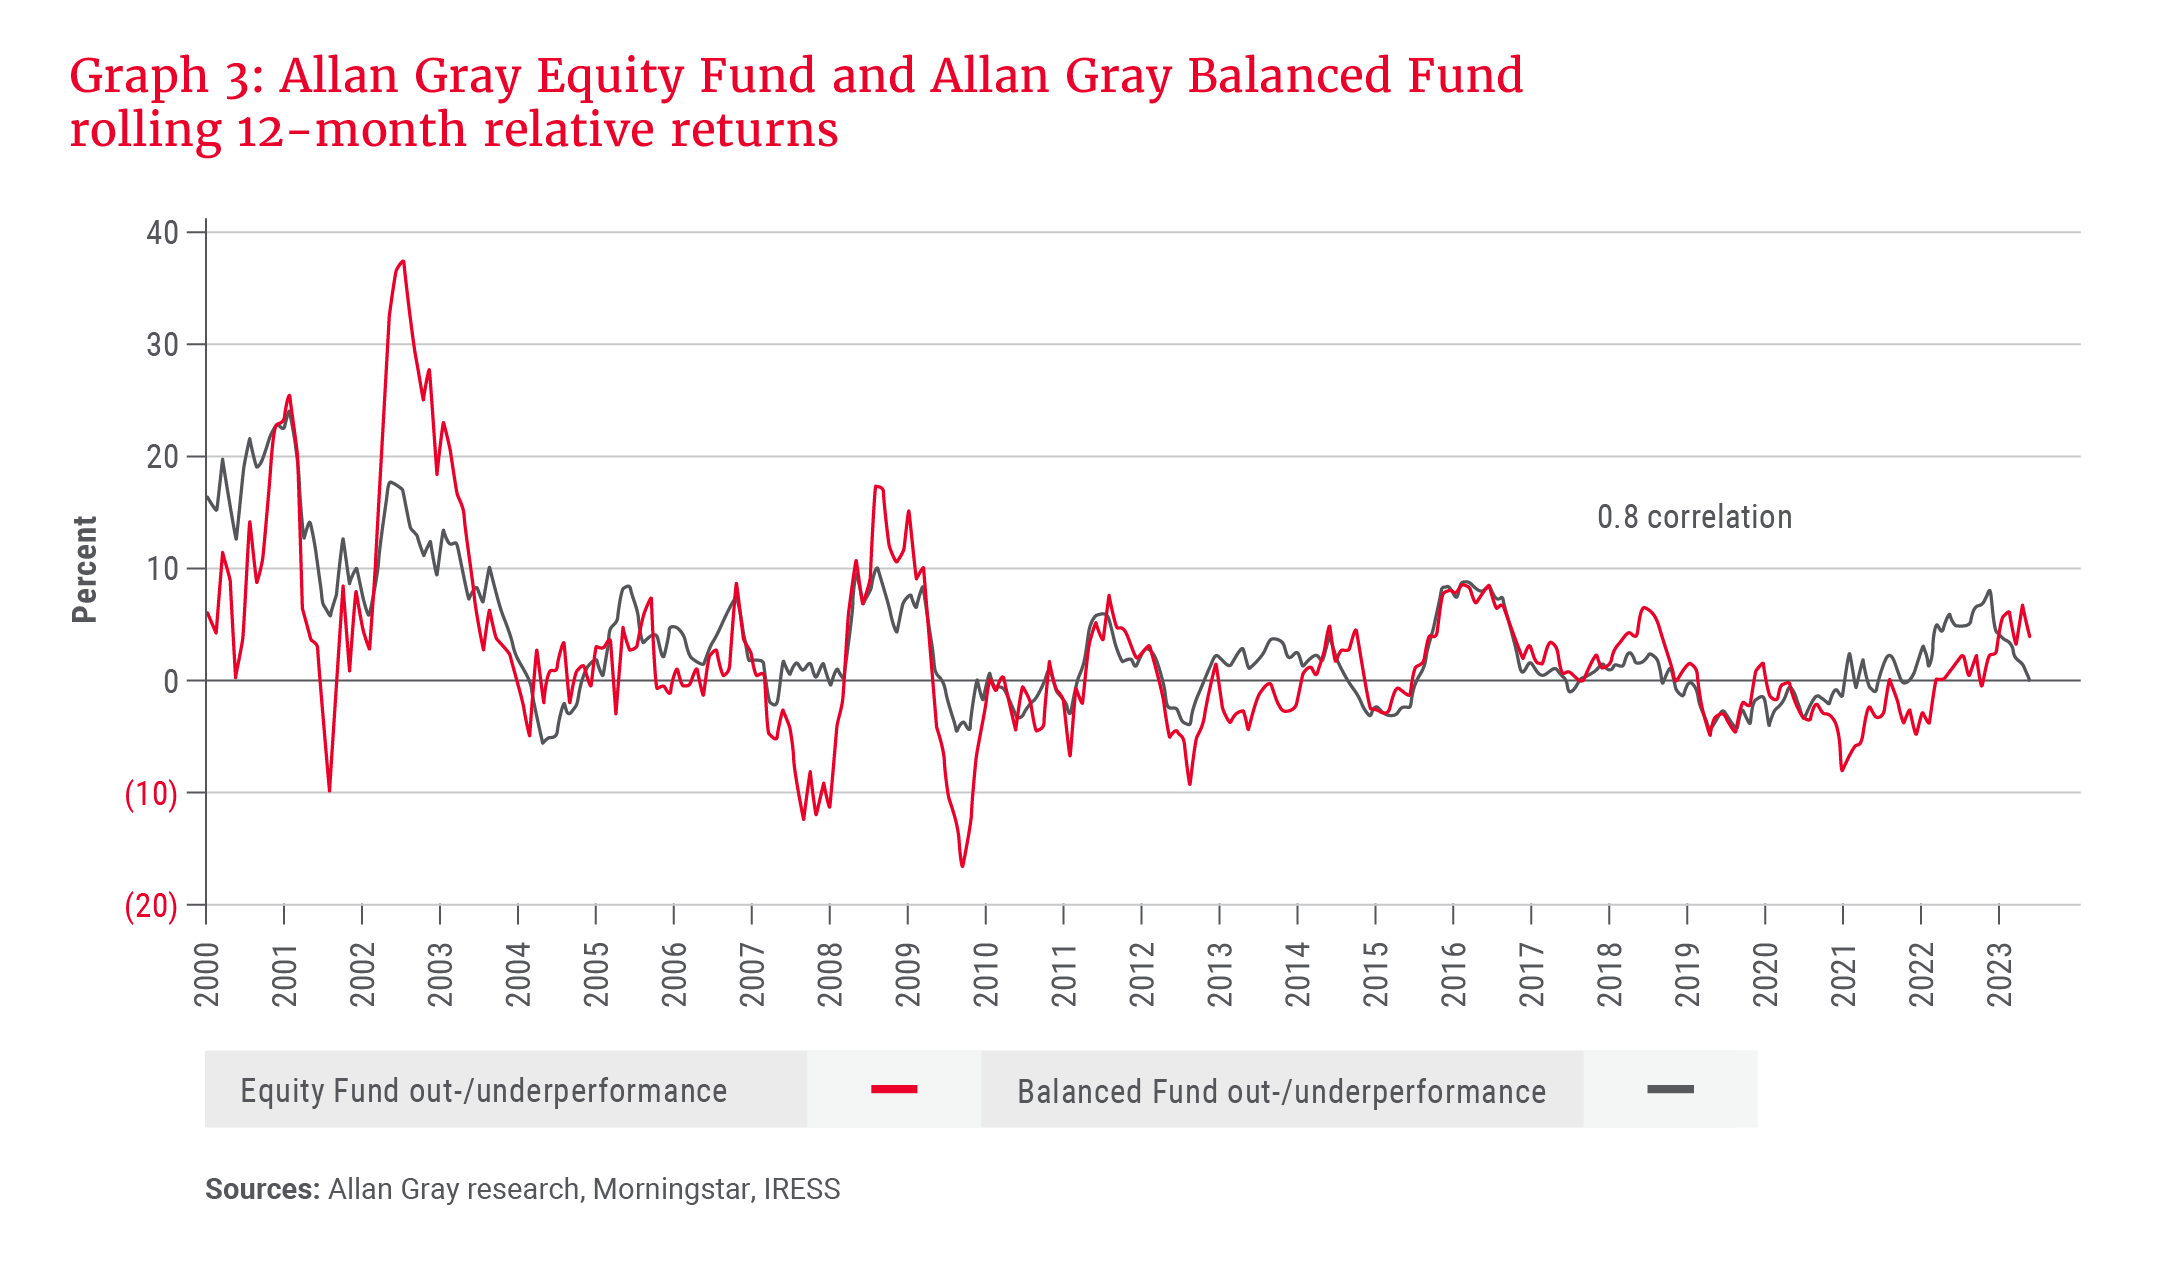 Allan Gray Equity Fund and Allan Gray Balanced Fund rolling 12-month relative returns